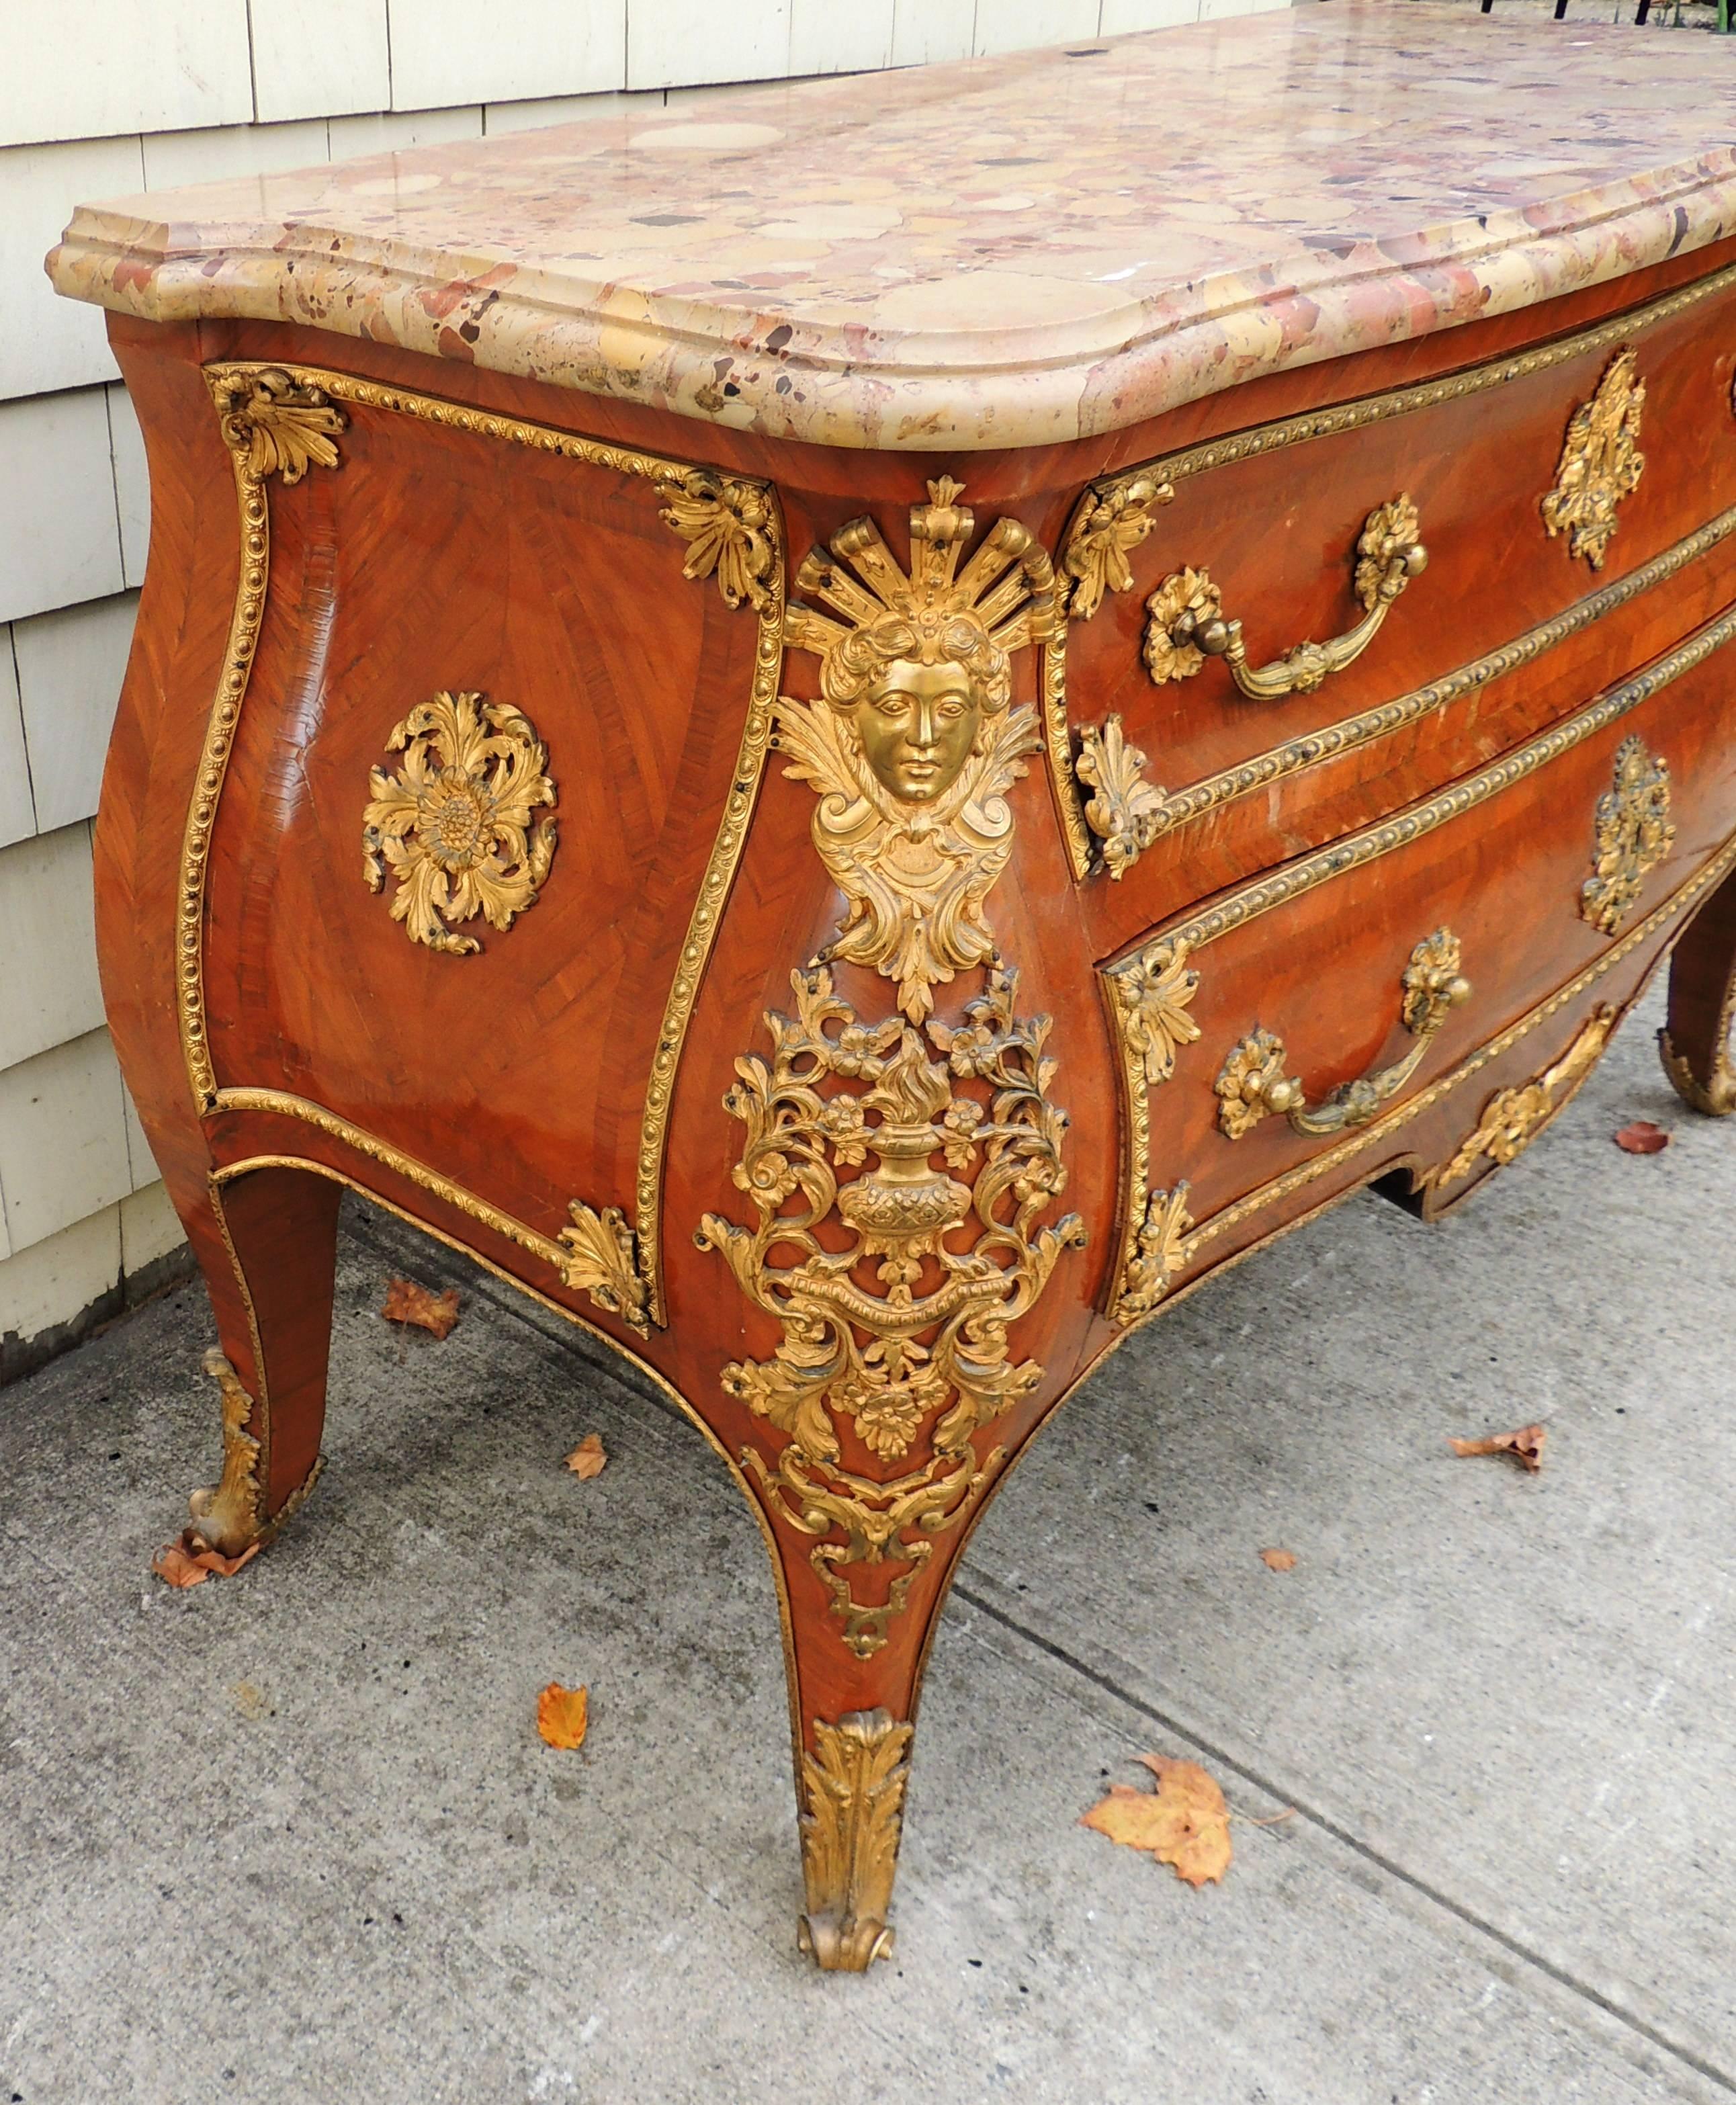 Wonderful French 19th Century Louis XV Ormolu Bronze-Mounted Marble-Top Commode For Sale 1